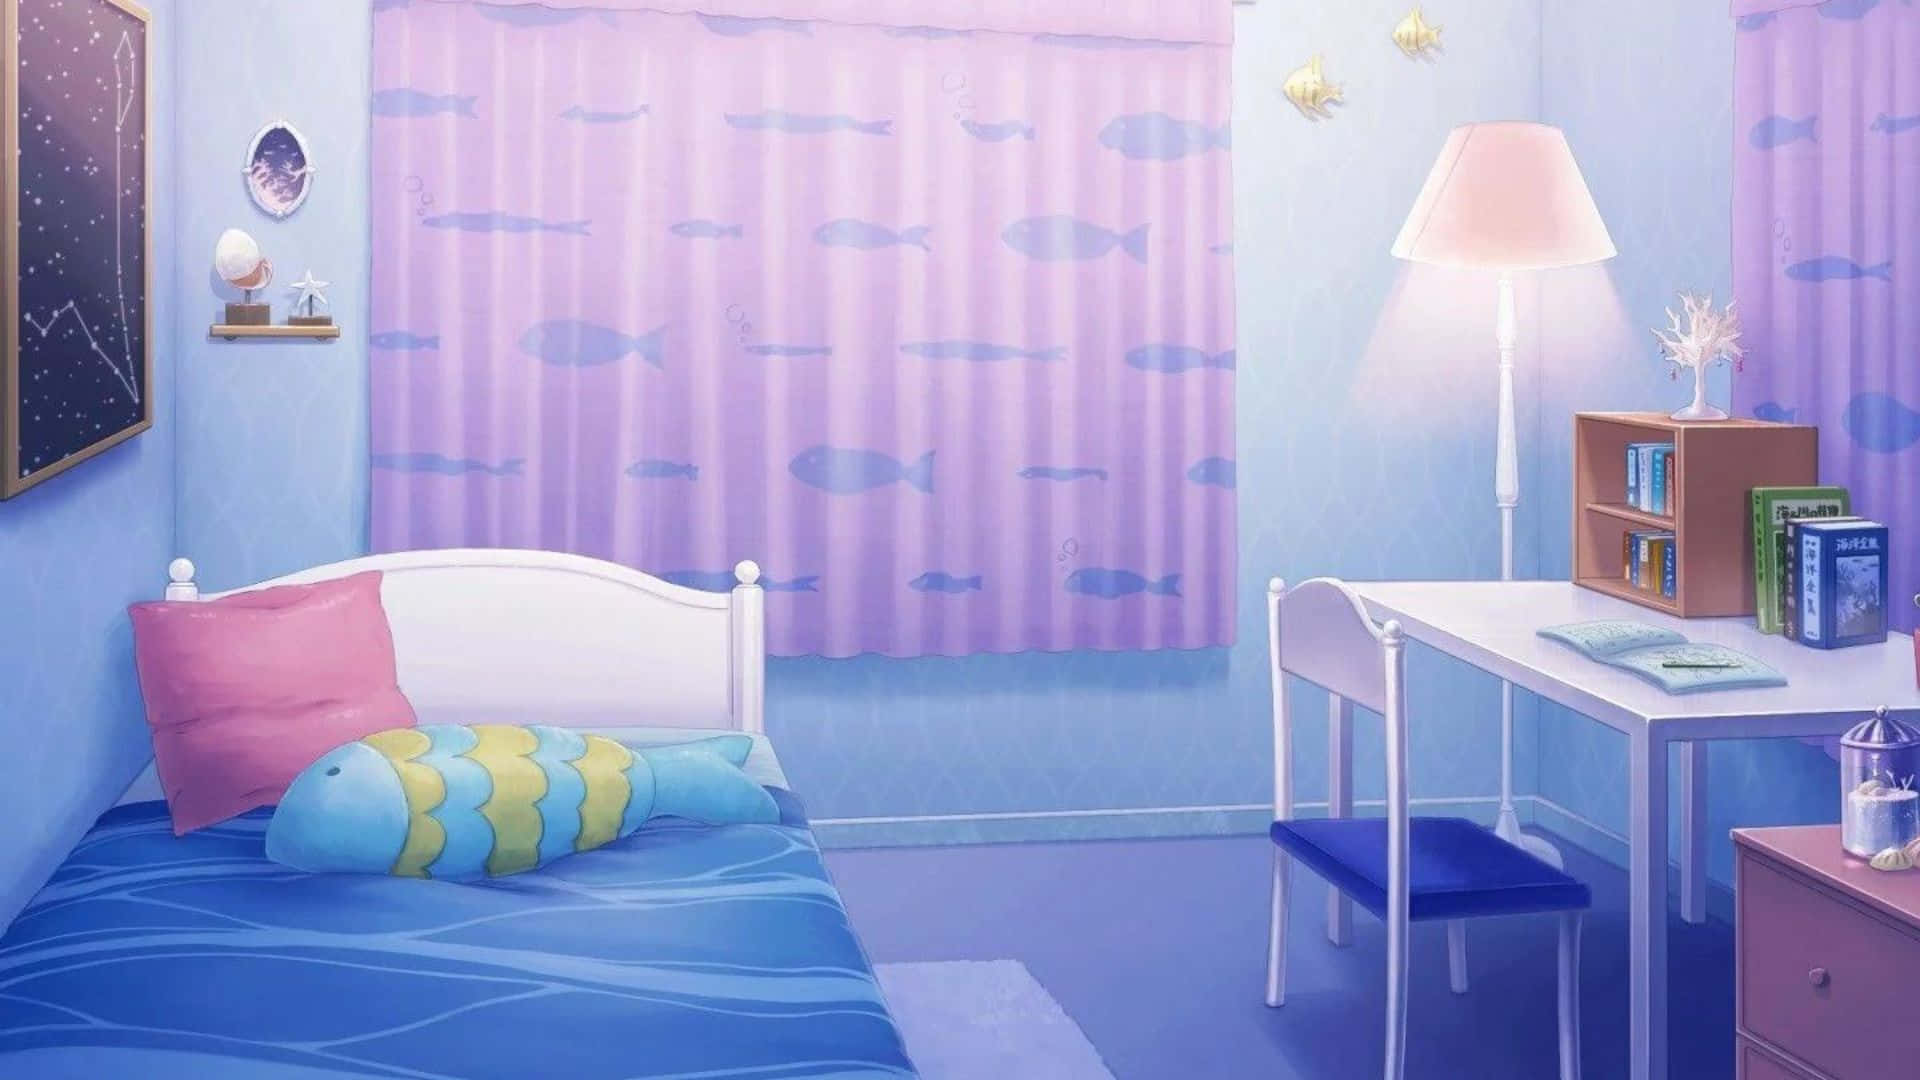 A Dreamy Kawaii Room with Pastel Details and Decorations Wallpaper